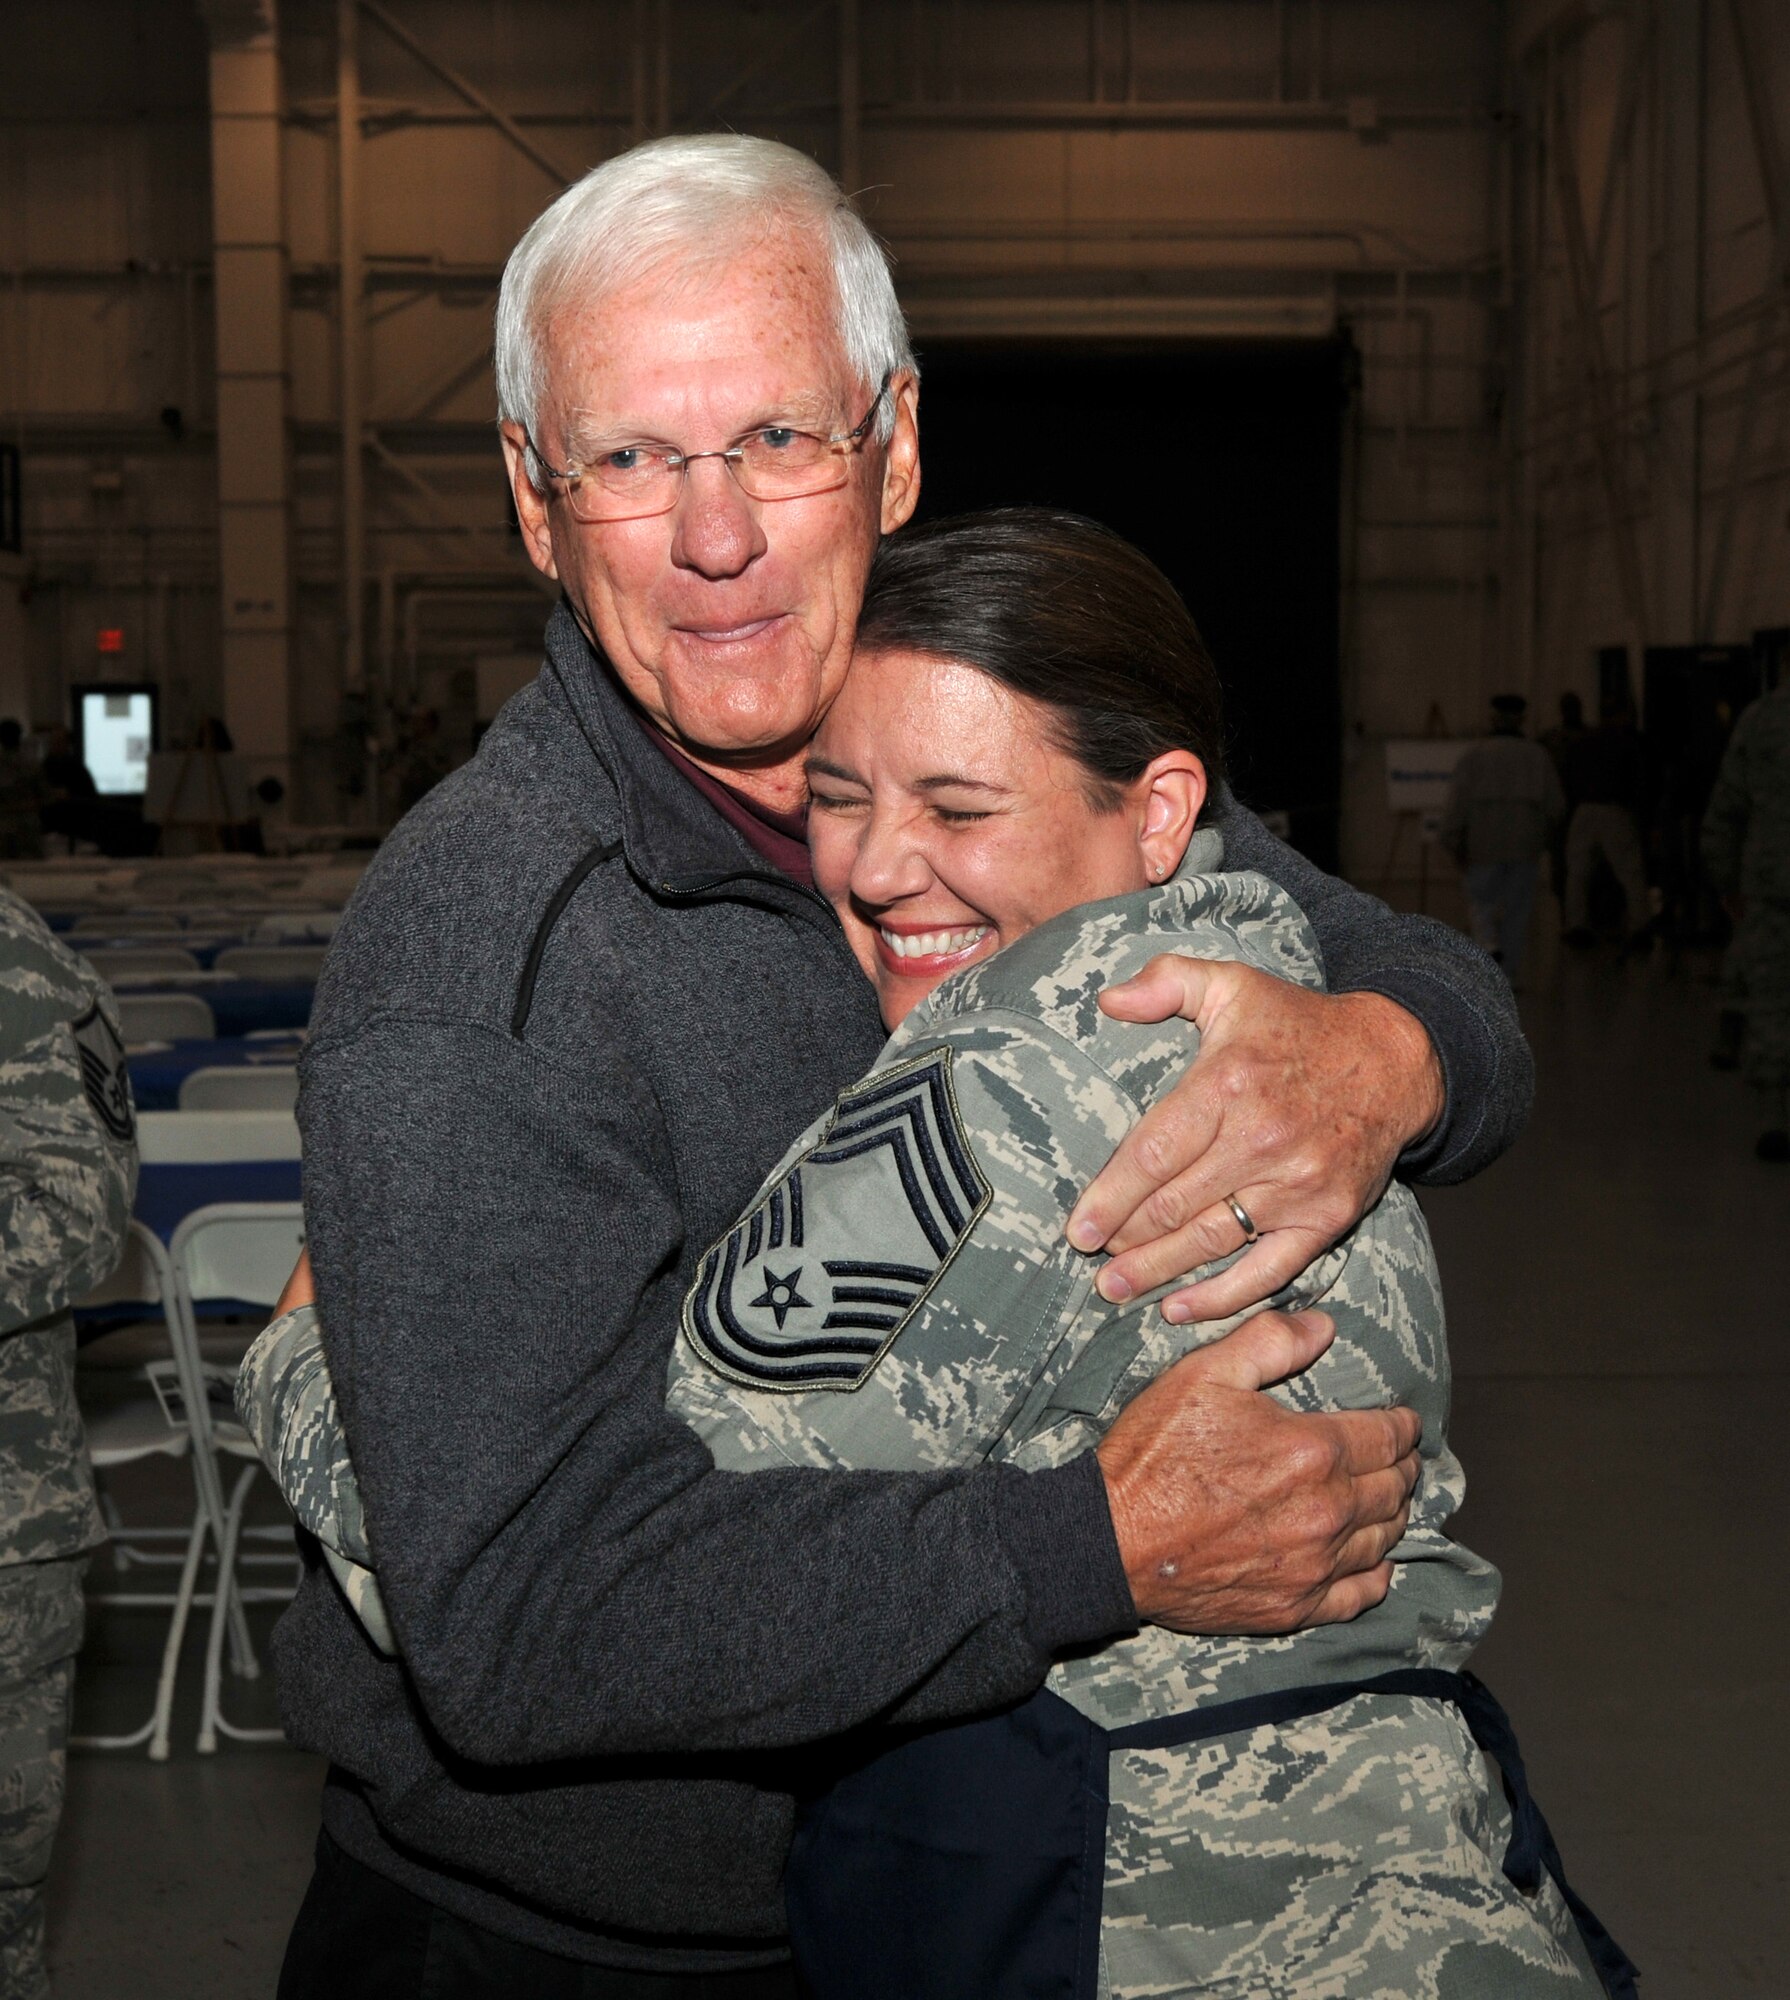 U.S. Air Force Chief Master Sgt. Susan A. Dietz, 145th Medical Group, gives a big hug to retired Lt. Col. Phil Carrigan, former member of the 145th Mission Support Flight, North Carolina Air National Guard, at the 18th Annual Retiree Breakfast held in a hanger at the North Carolina Air National Guard base, Charlotte Douglas Intl. Airport, Friday, Oct. 25, 2013. (Air National Guard photo by Master Sgt. Patricia F. Moran/Released) 